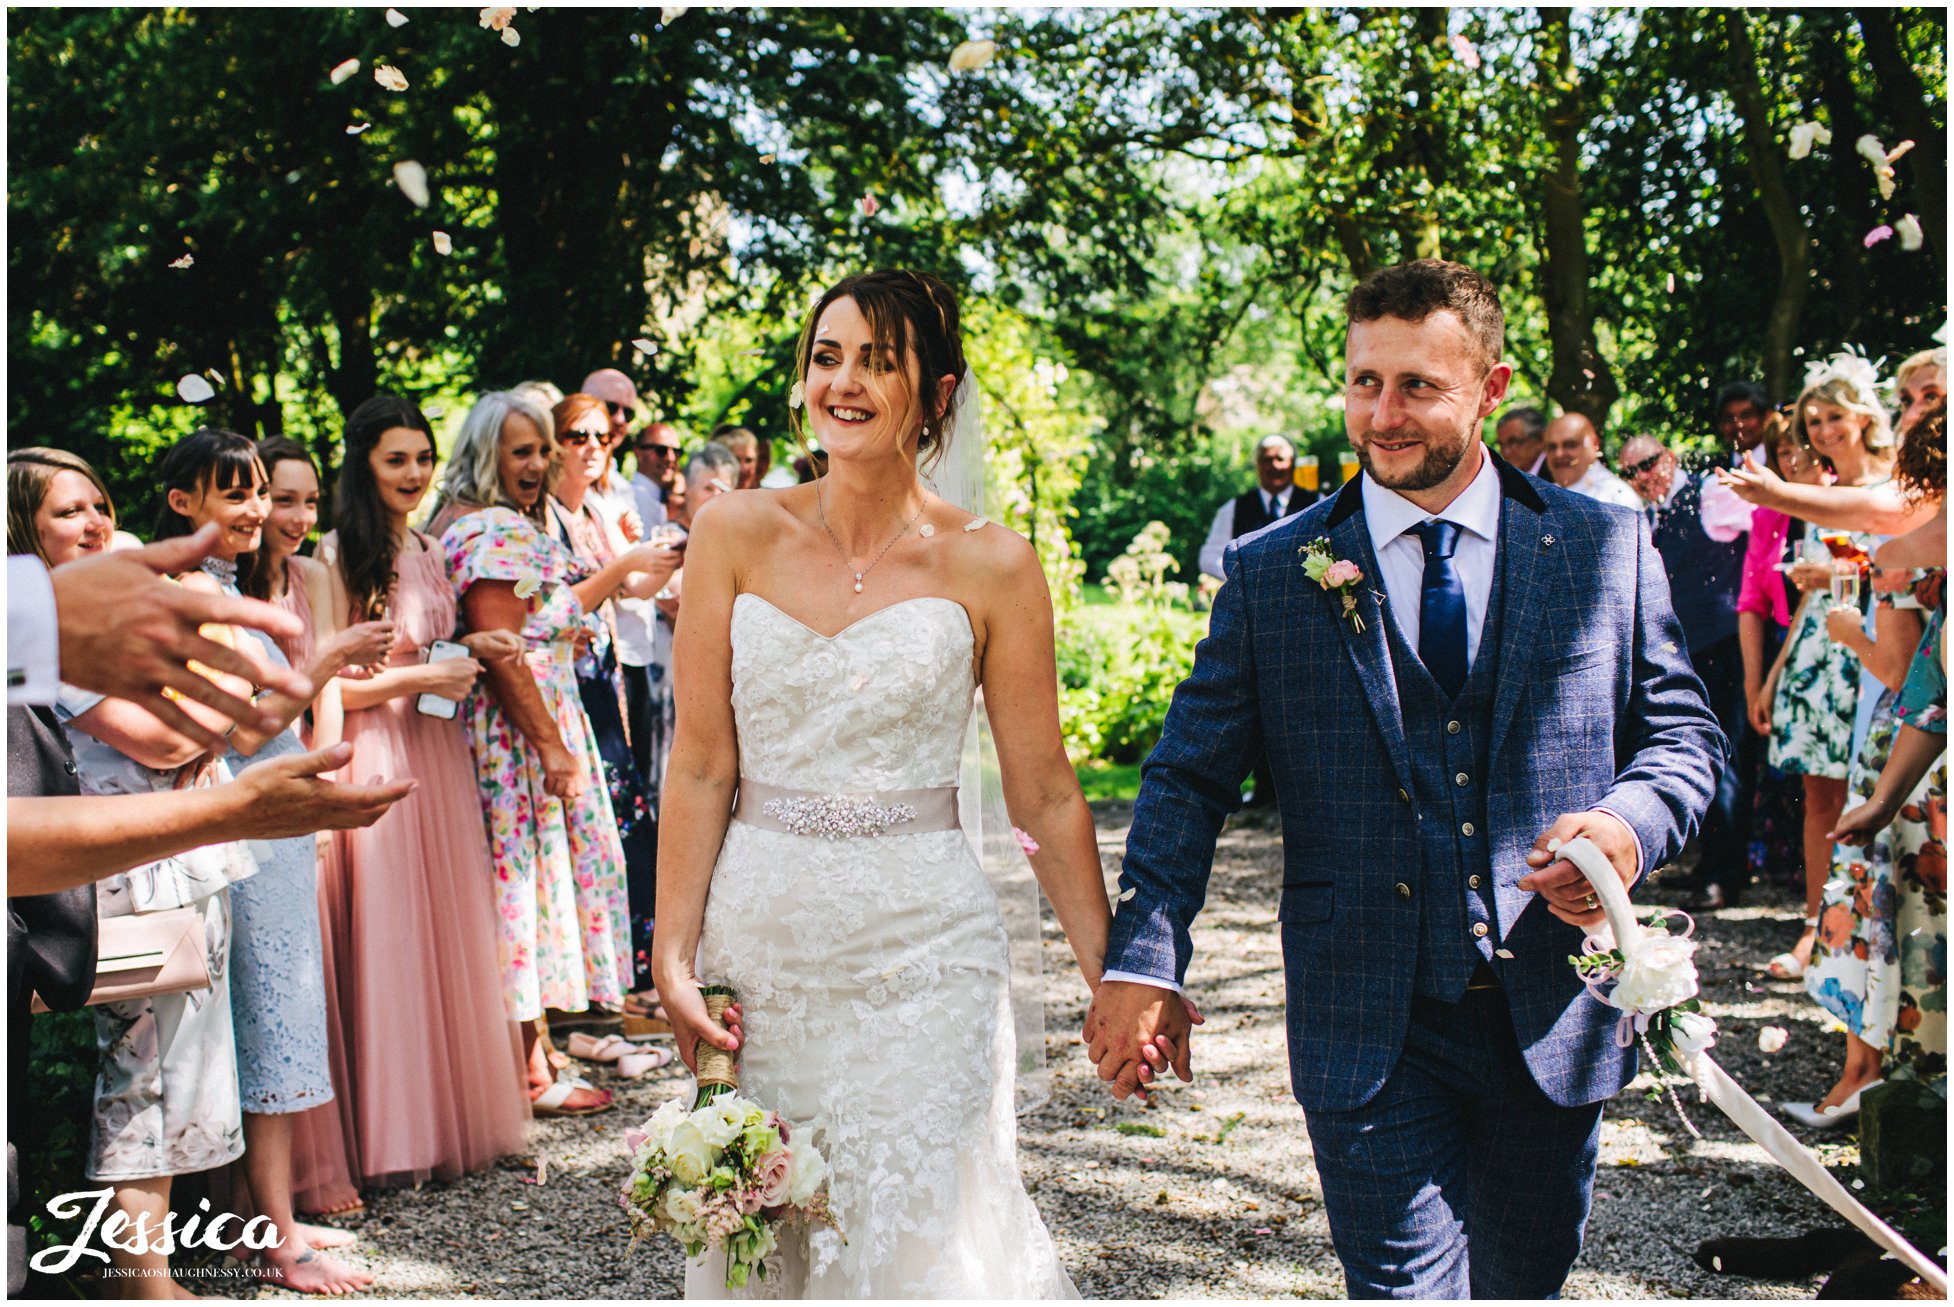 the couple are showered in confetti at eyam hall in derbyshire